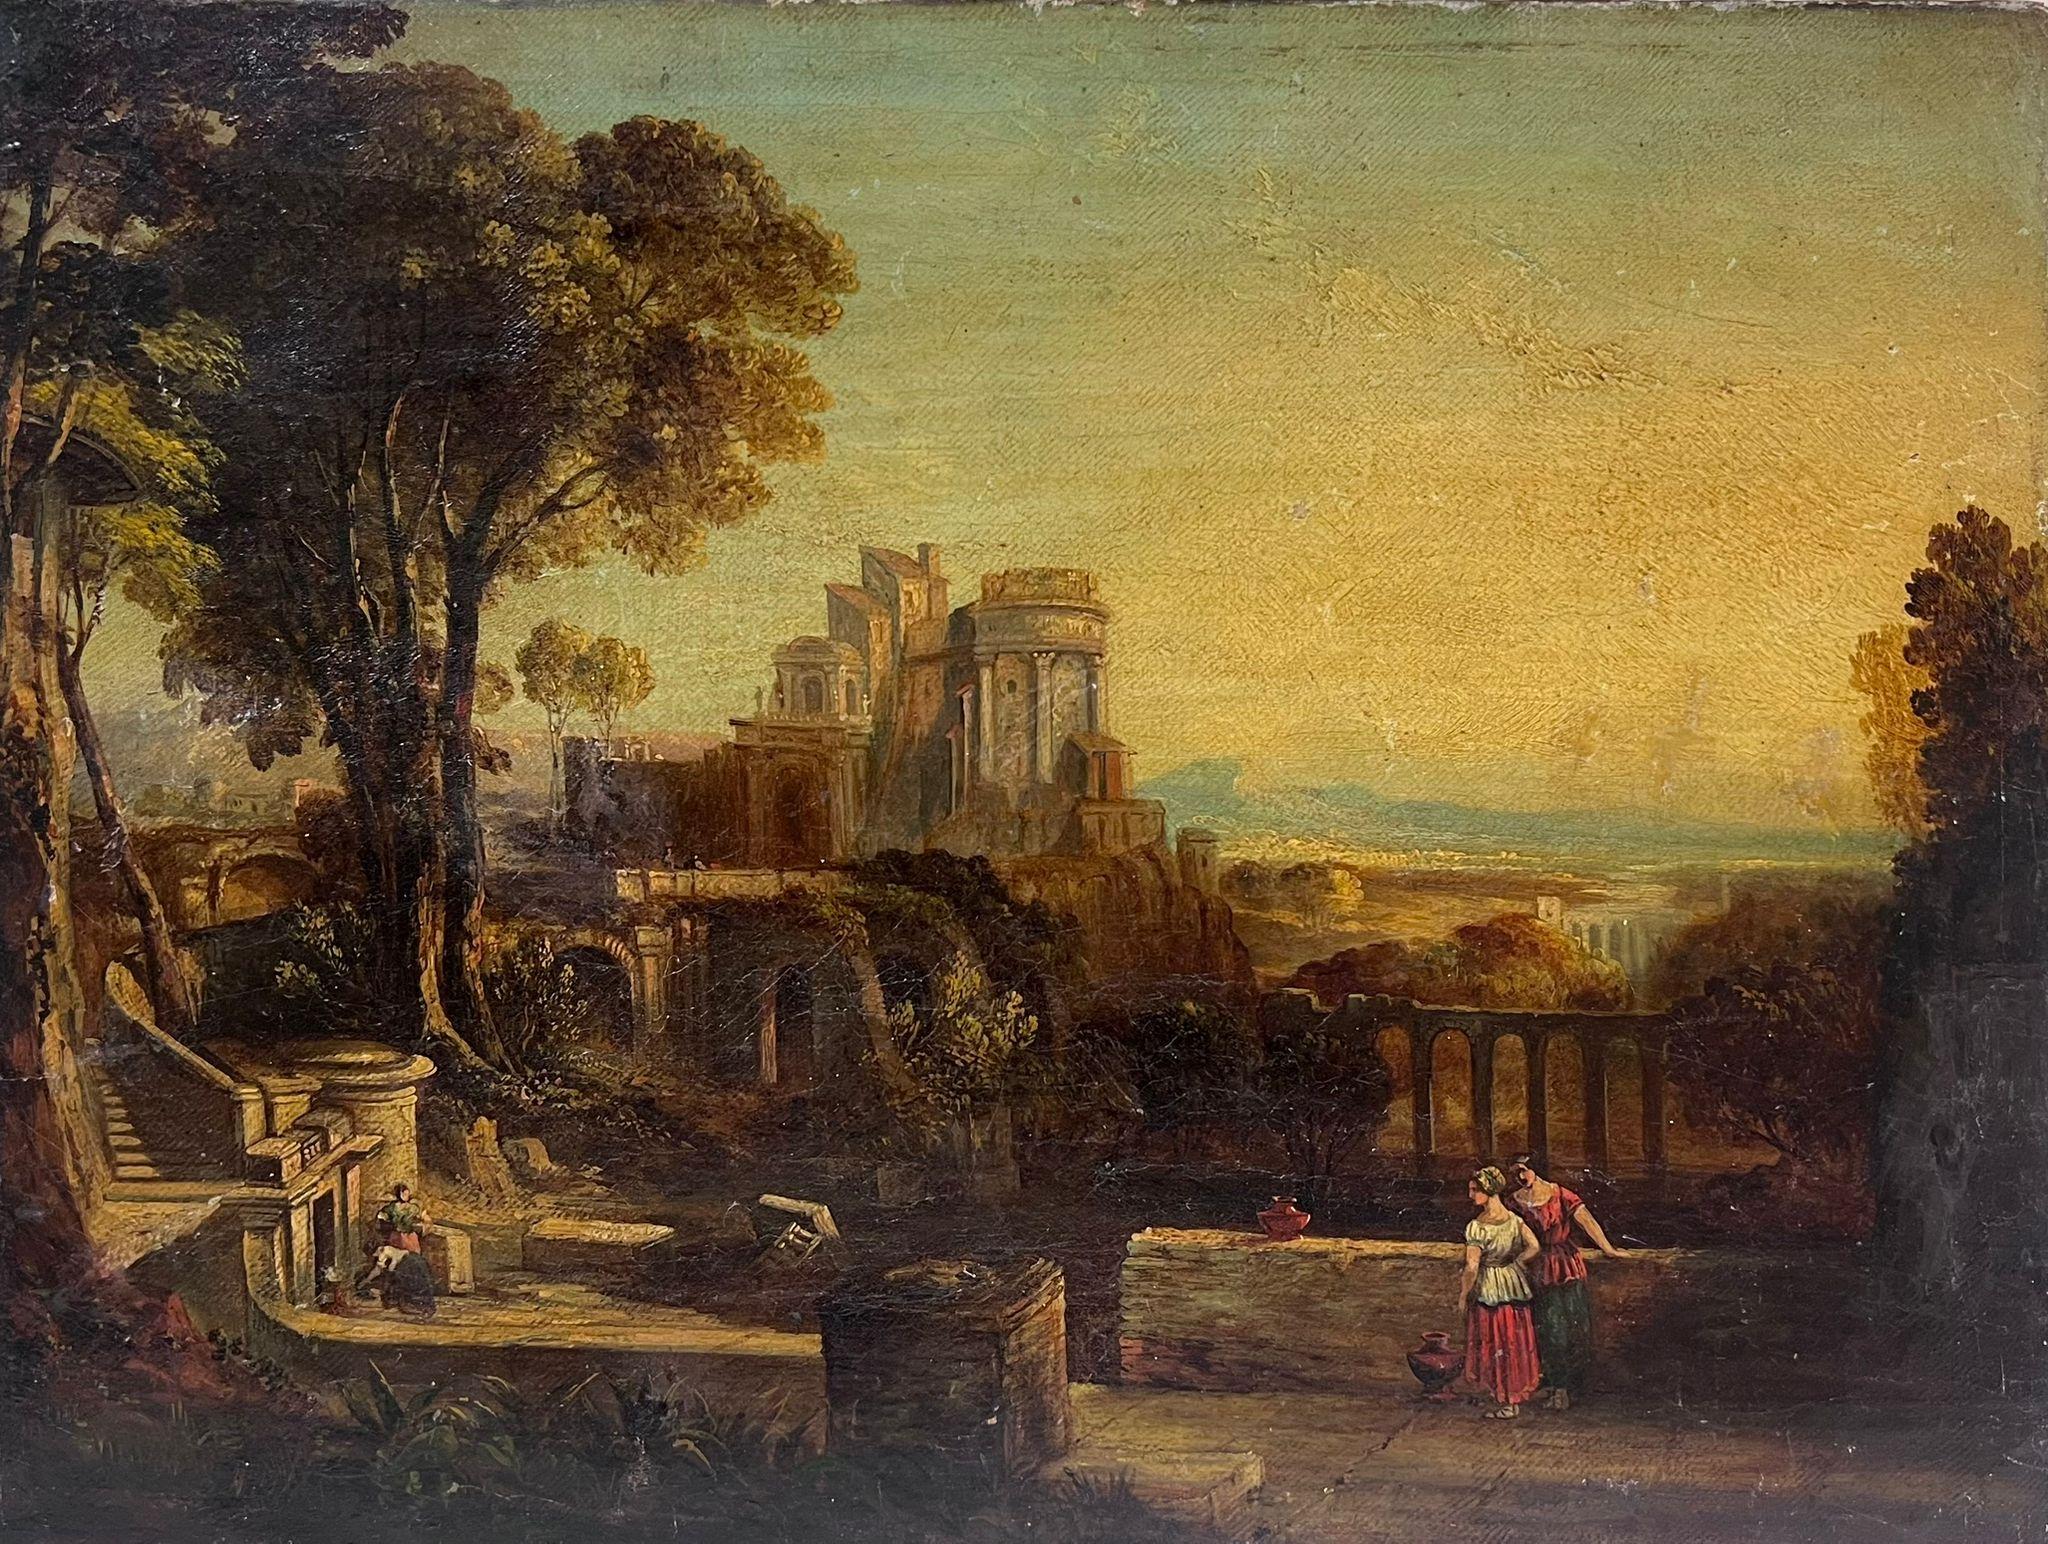 The Arcadian View
Italian School, circa 1800
Grand Tour subject
oil on canvas, unframed
canvas : 12 x 16 inches
provenance: private collection, UK
condition: very good and sound condition, with old restoration